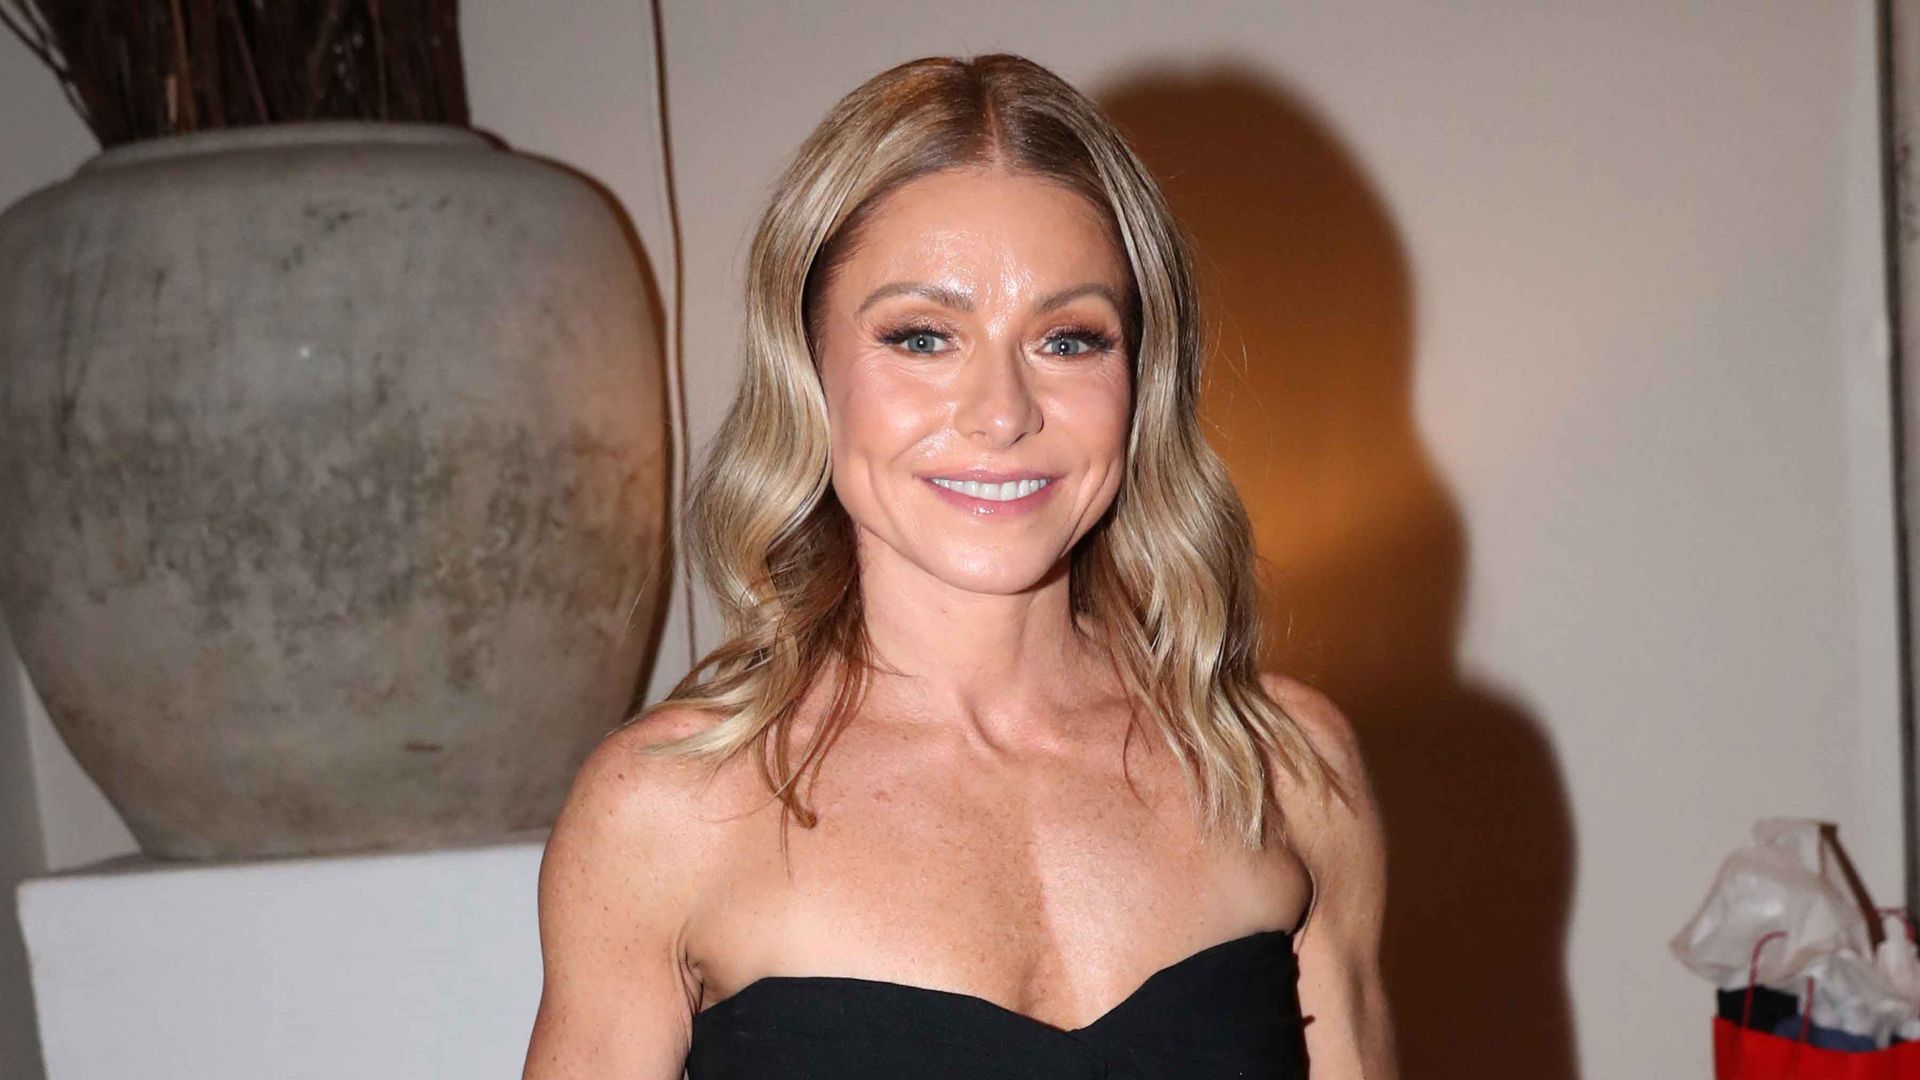 Kelly Ripa's all-natural appearance in floral swimsuit is envy-inducing